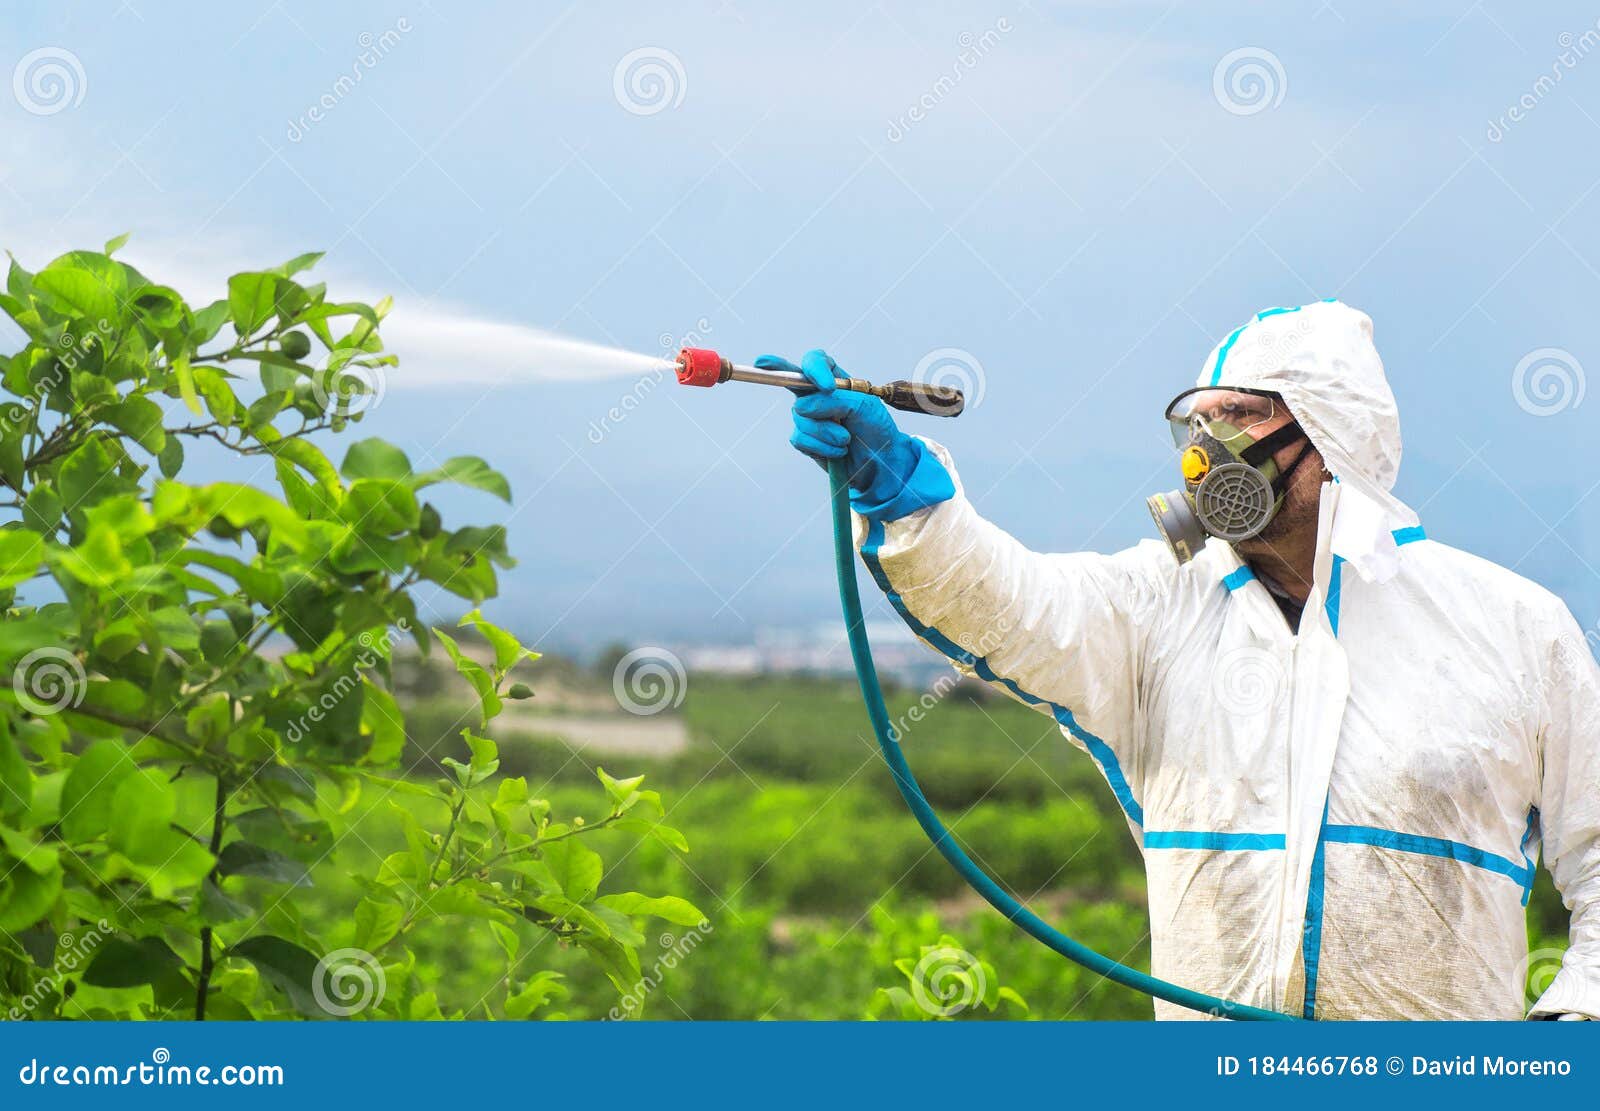 spray ecological pesticide. farmer fumigate in protective suit and mask lemon trees. man spraying toxic pesticides, pesticide,